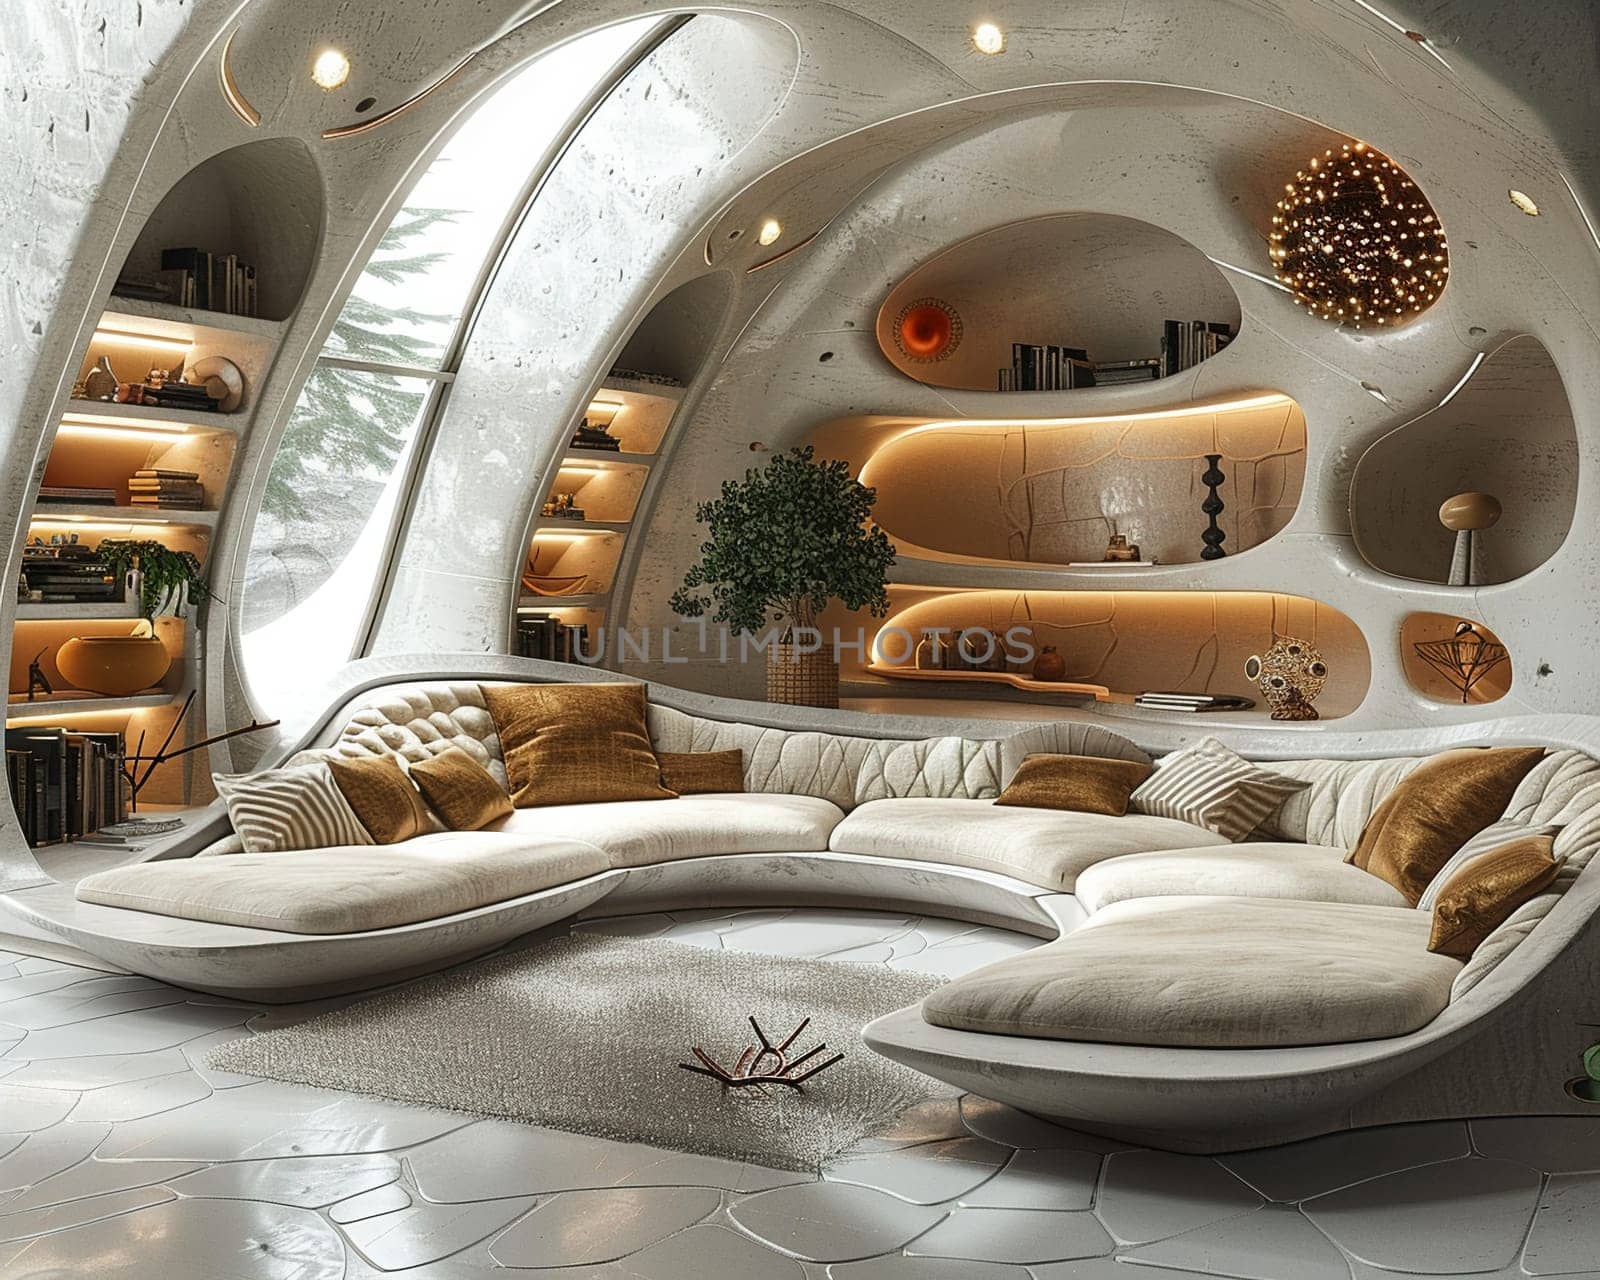 Retro-futuristic living room with curved furniture and metallic accents3D render